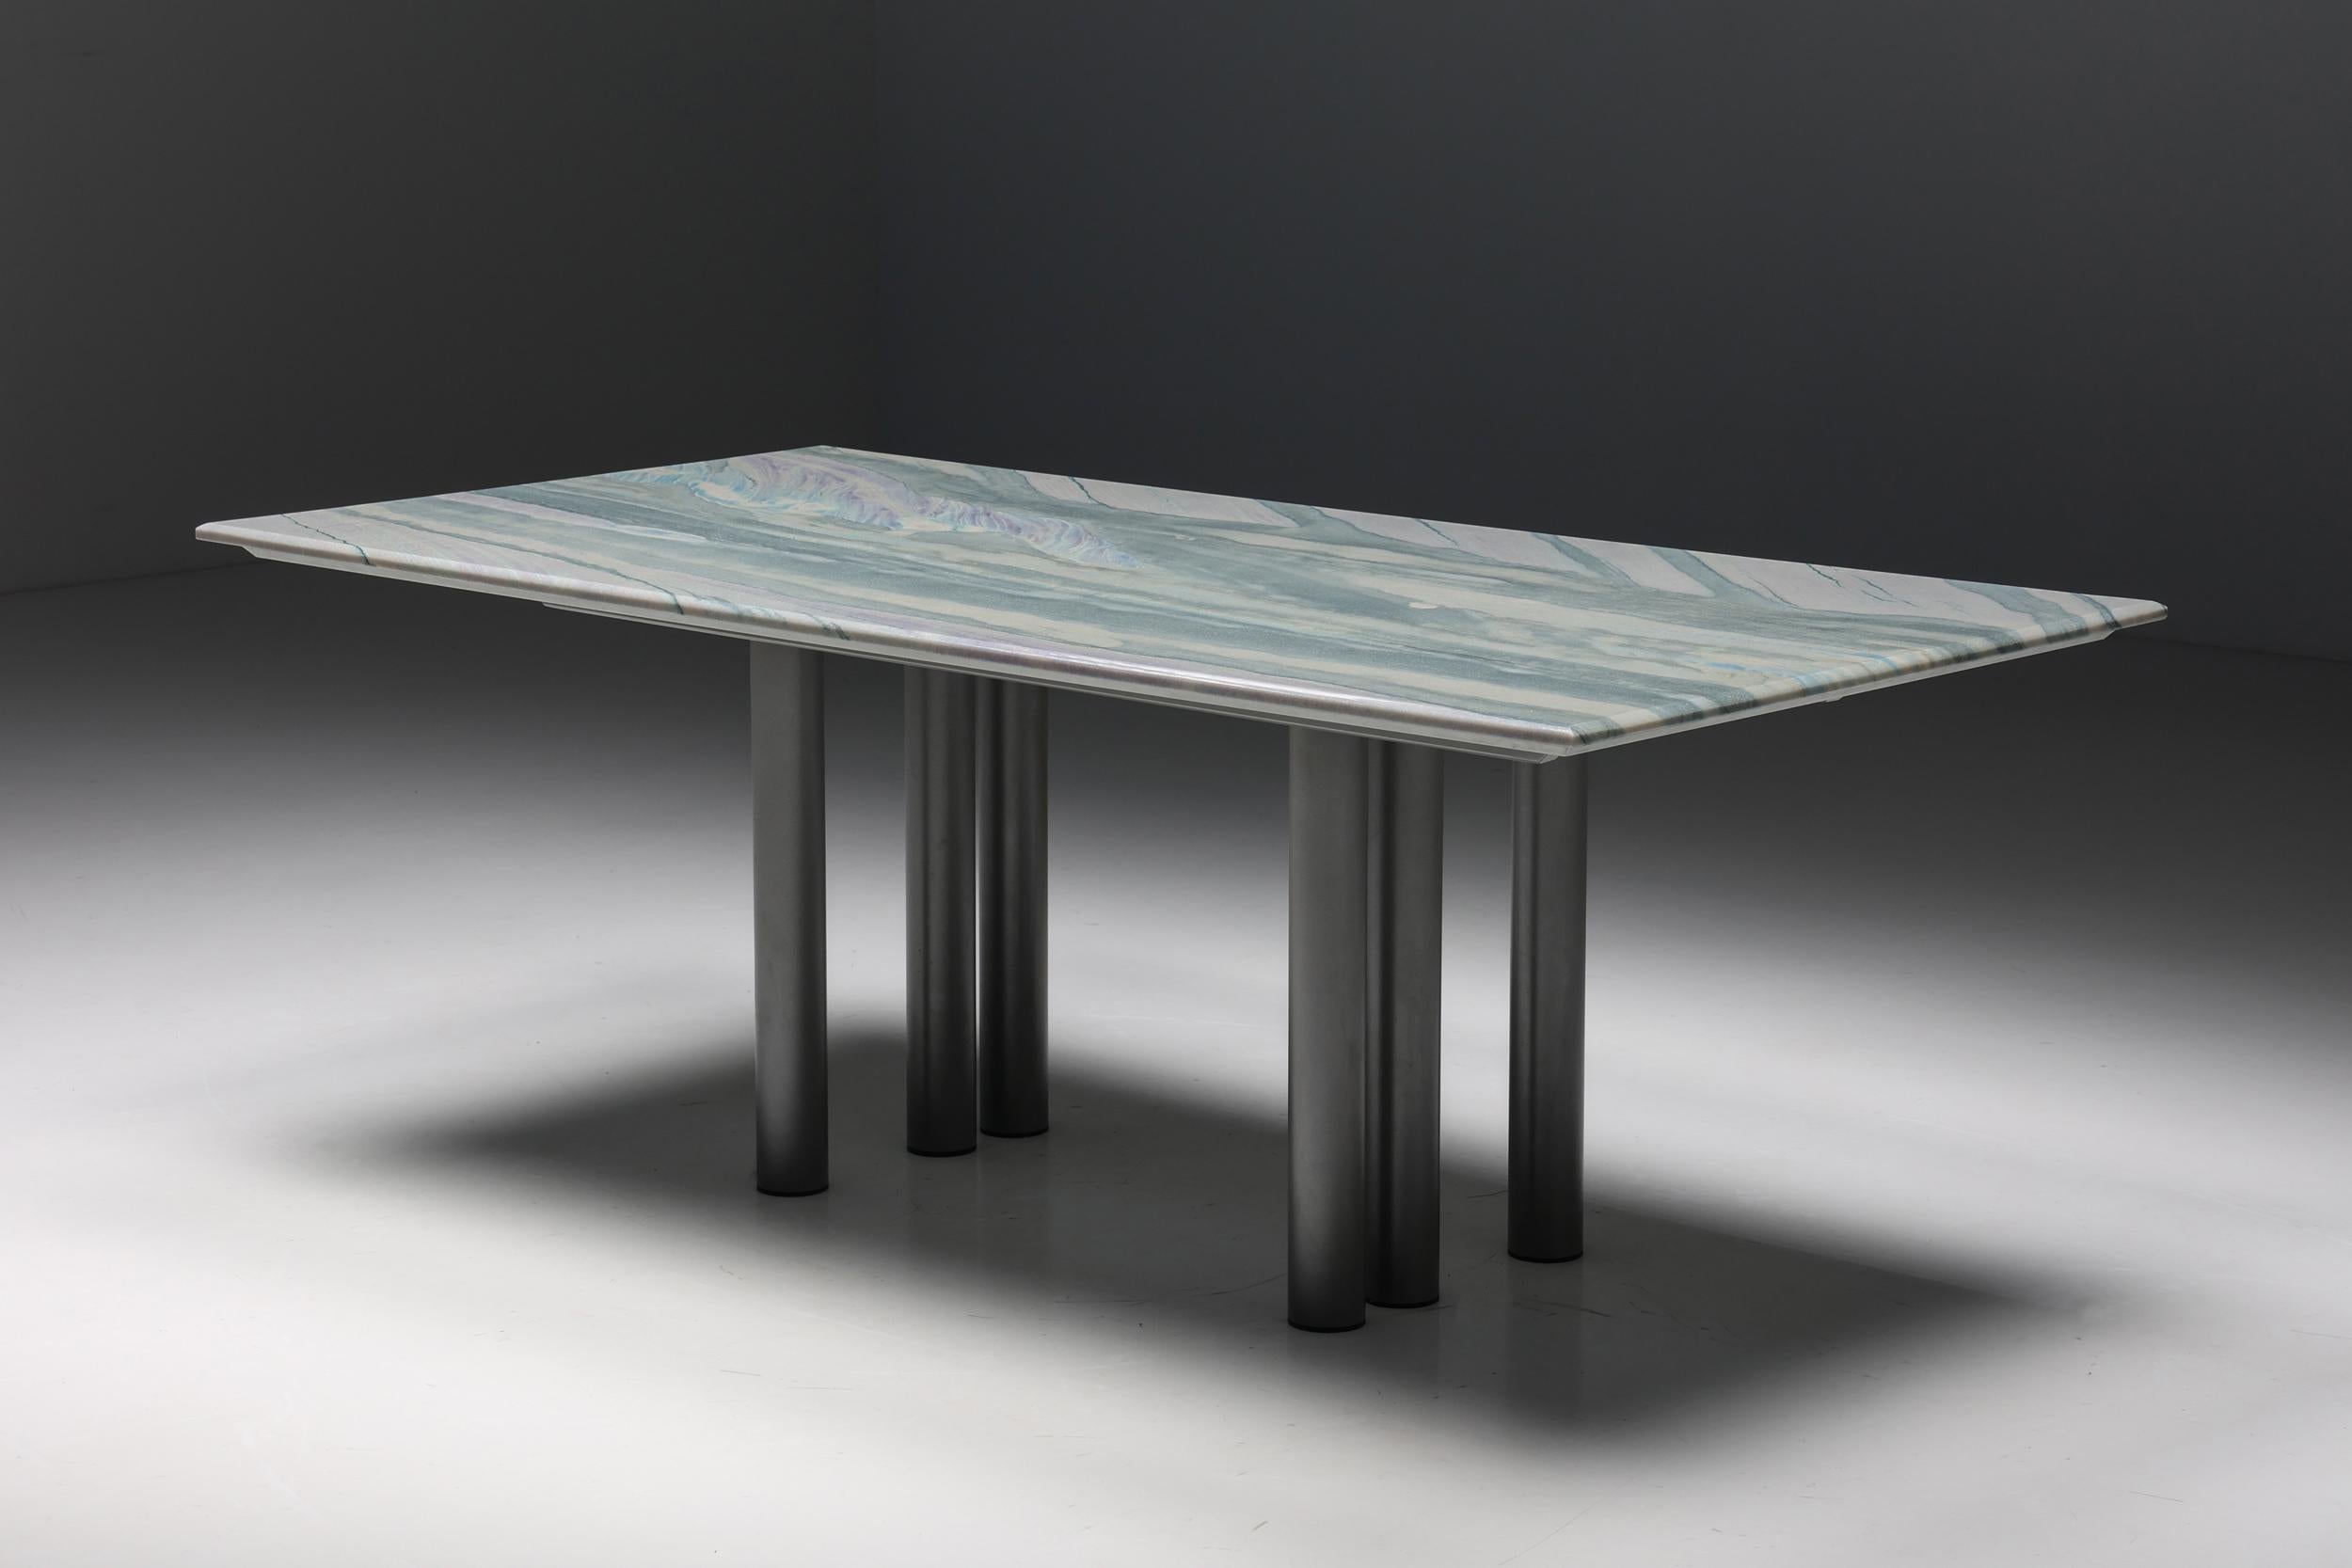 Pia Manu Dining Table in Marble & Steel, 1990s

Belgian post-modern marble sculptural dining table created by Pia Manu in the 1990s. A sculptural design featuring six cylindrical steel legs and a marble tabletop. The marble shows beautiful veins